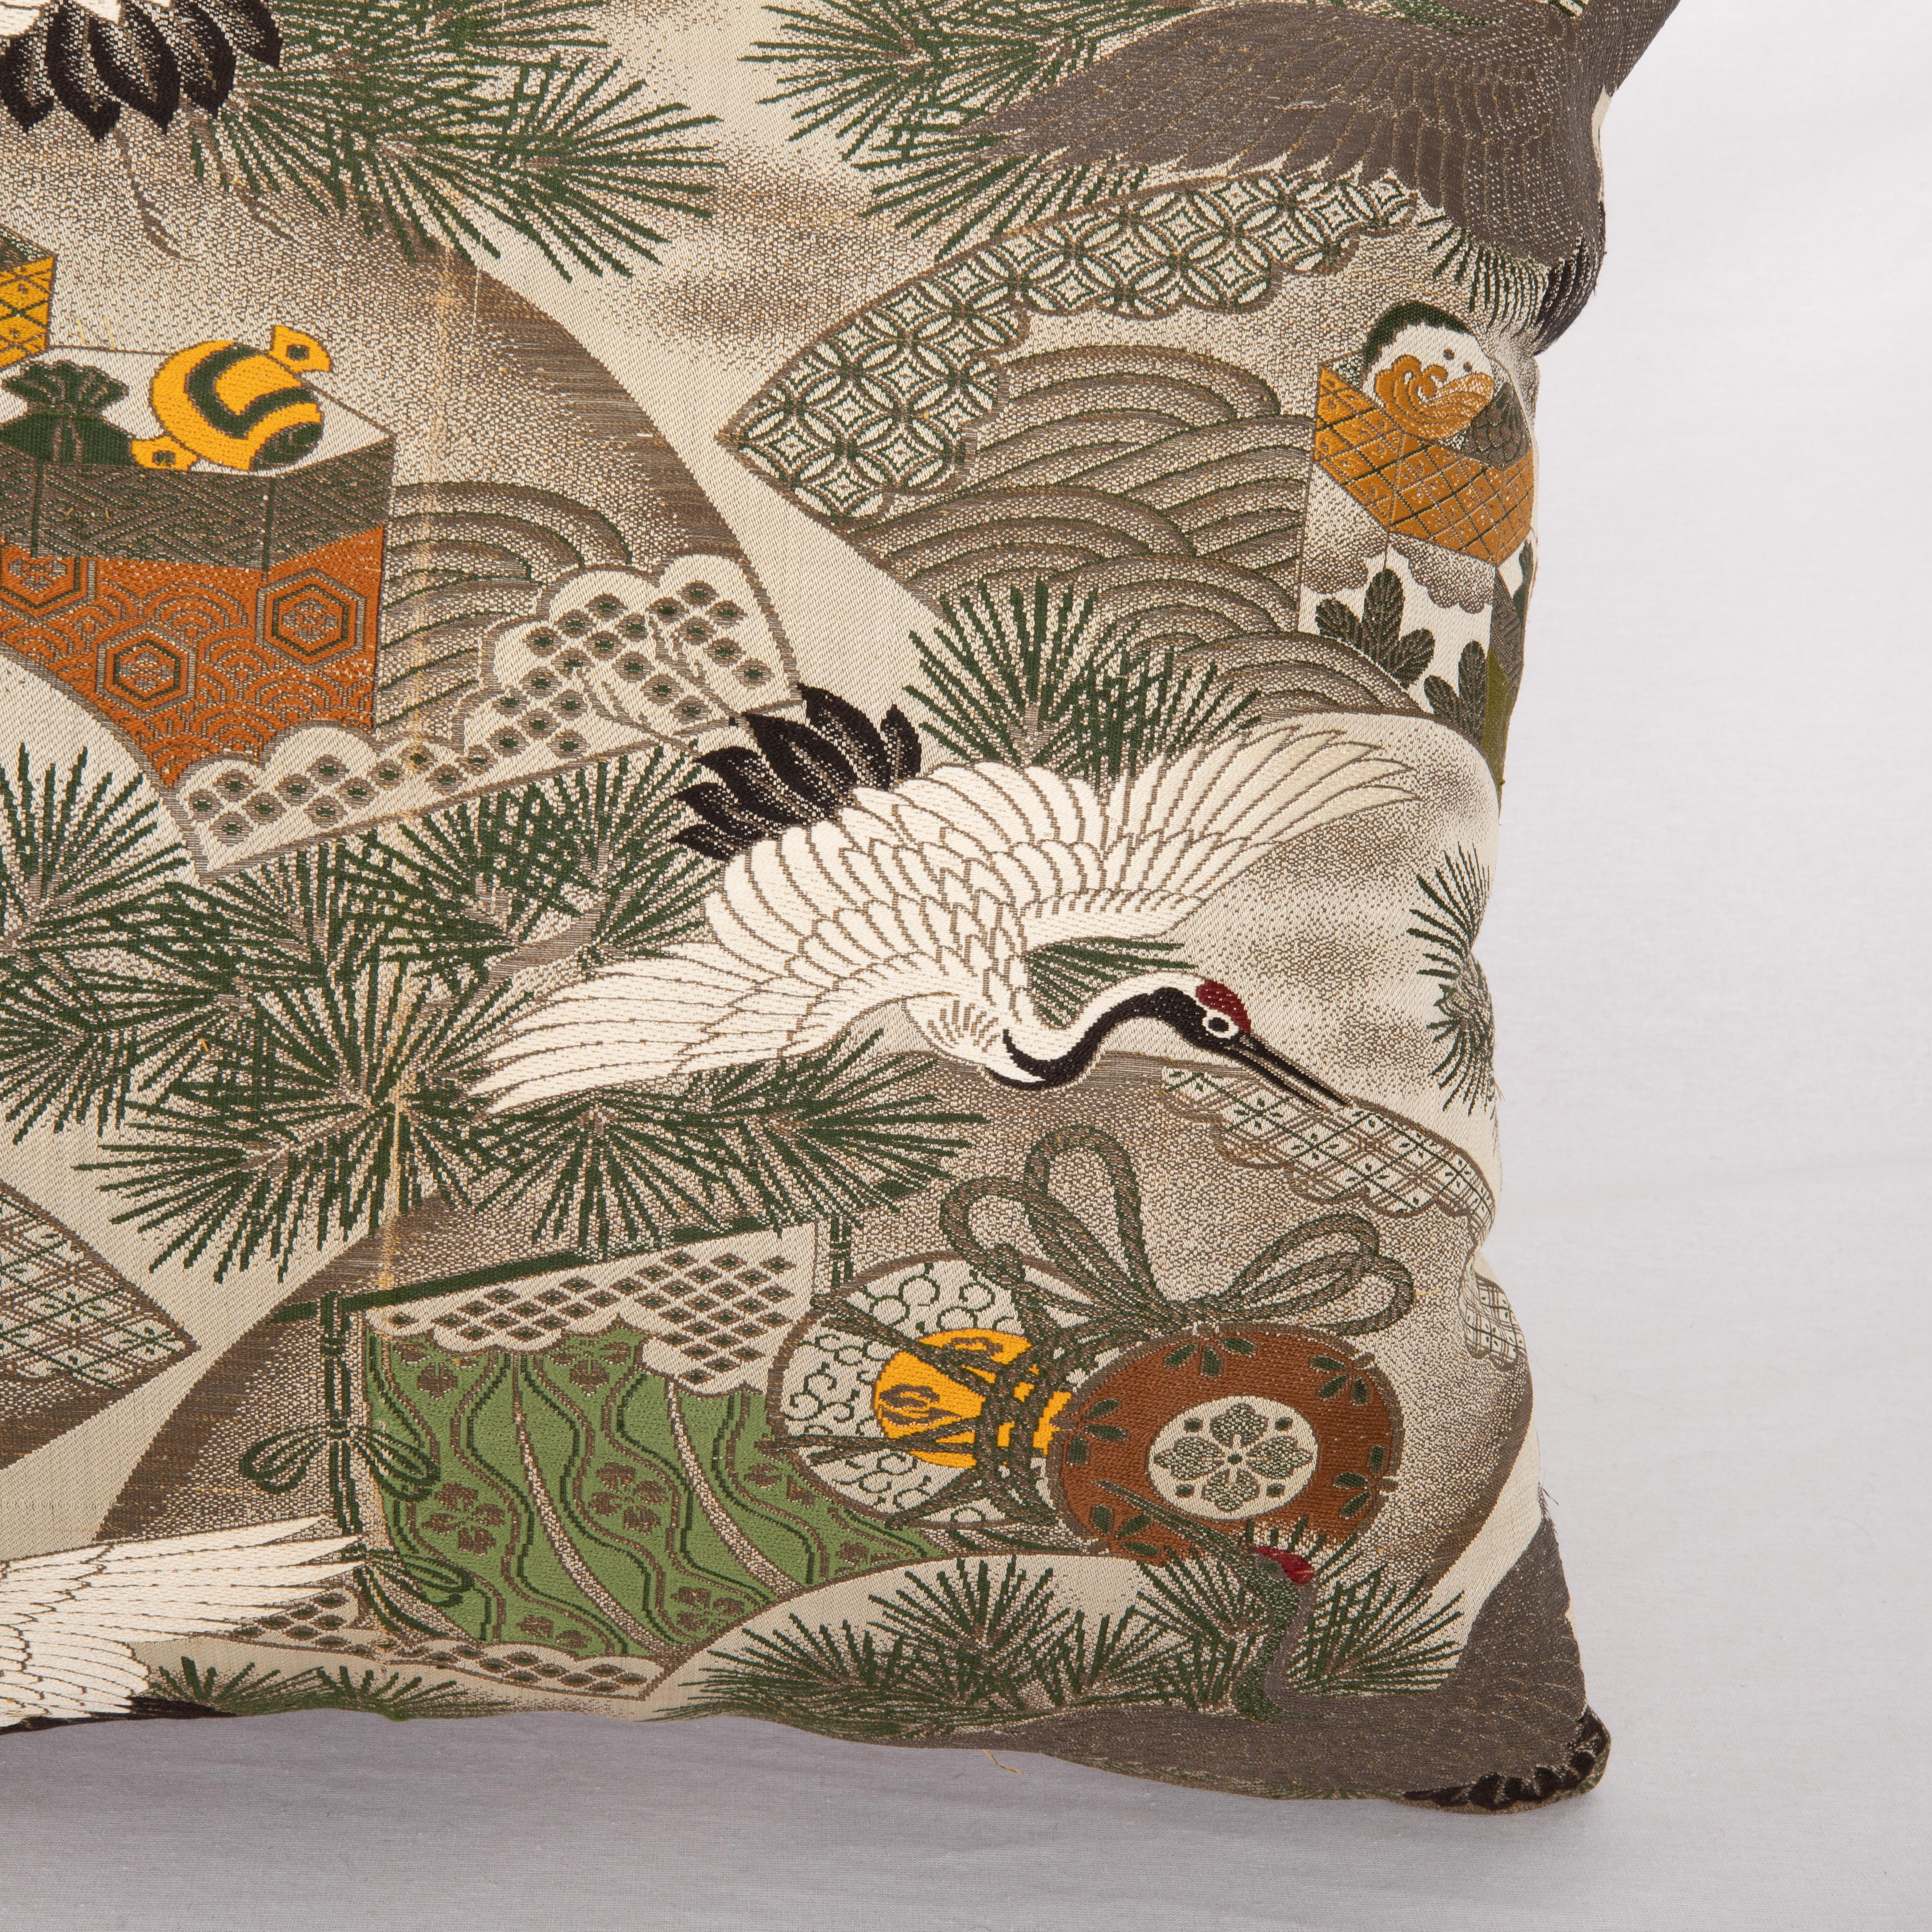 Woven Pillow Cover Made from a Vintage Obi, Japan